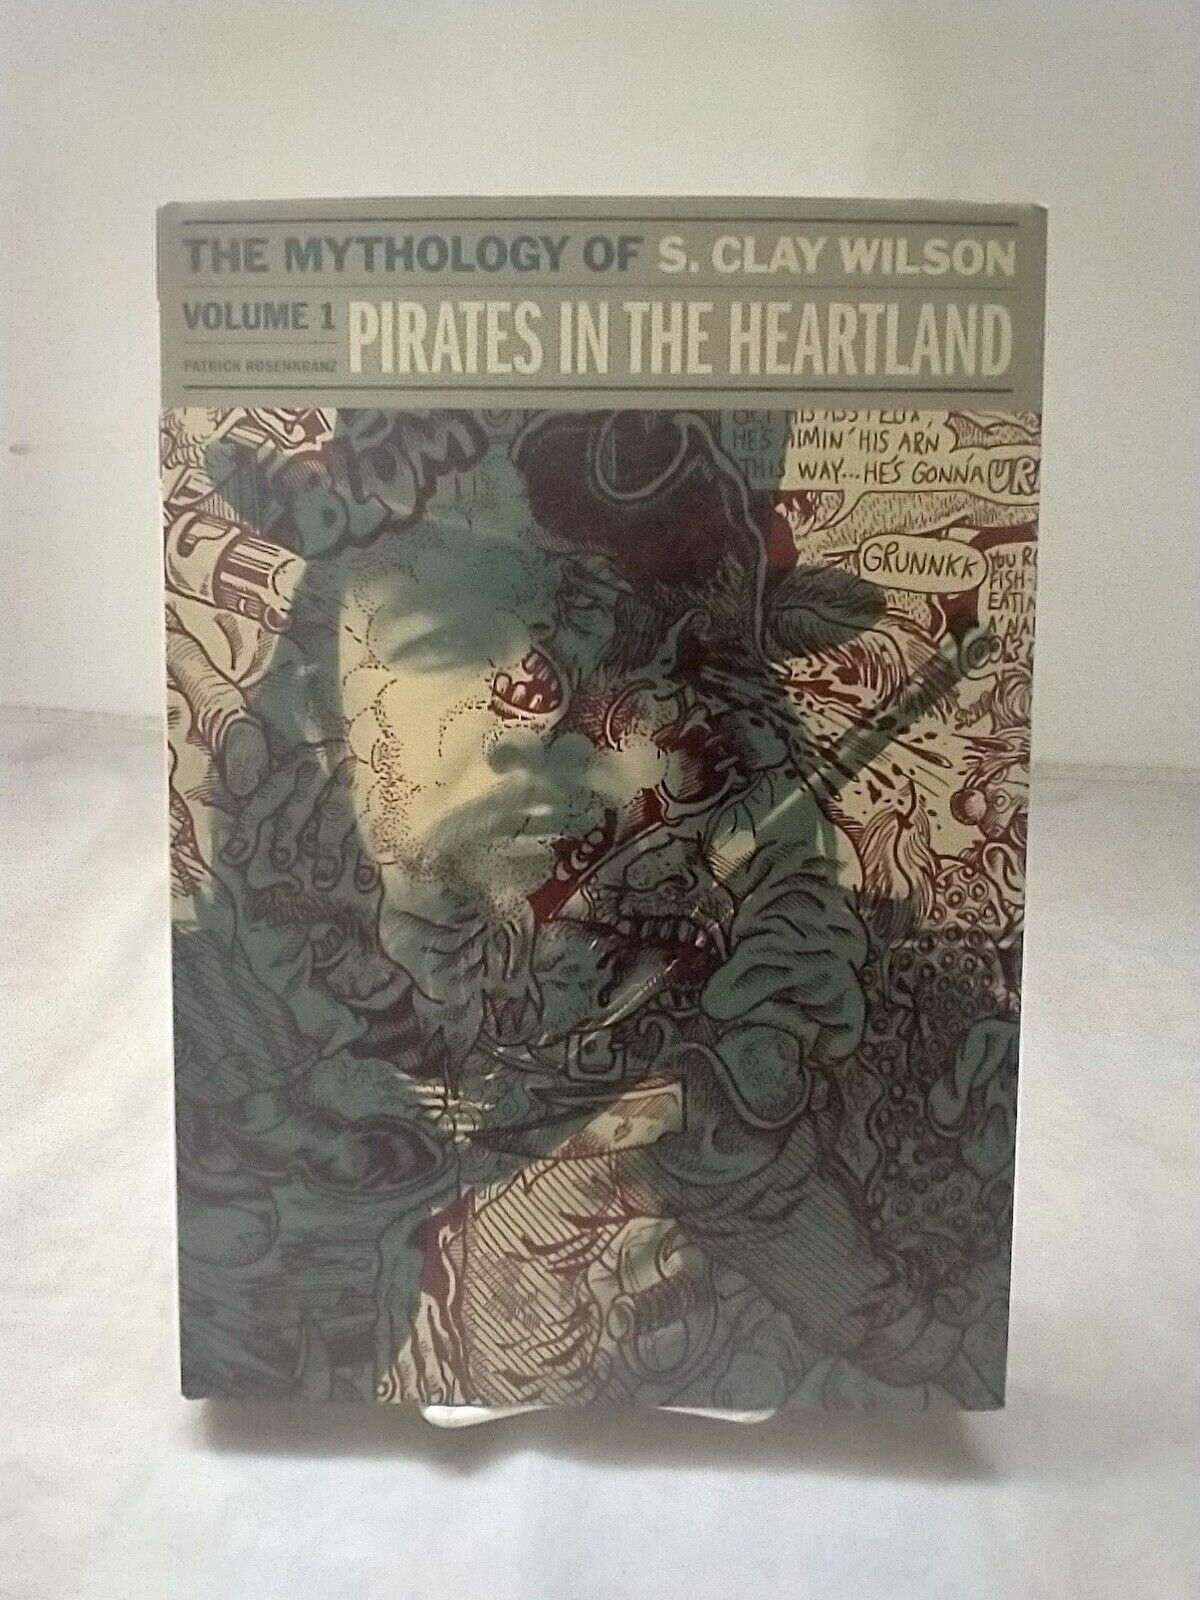 Pirates in the Heartland: The Mythology of S. Clay Wilson Volume 1 Hardcover New